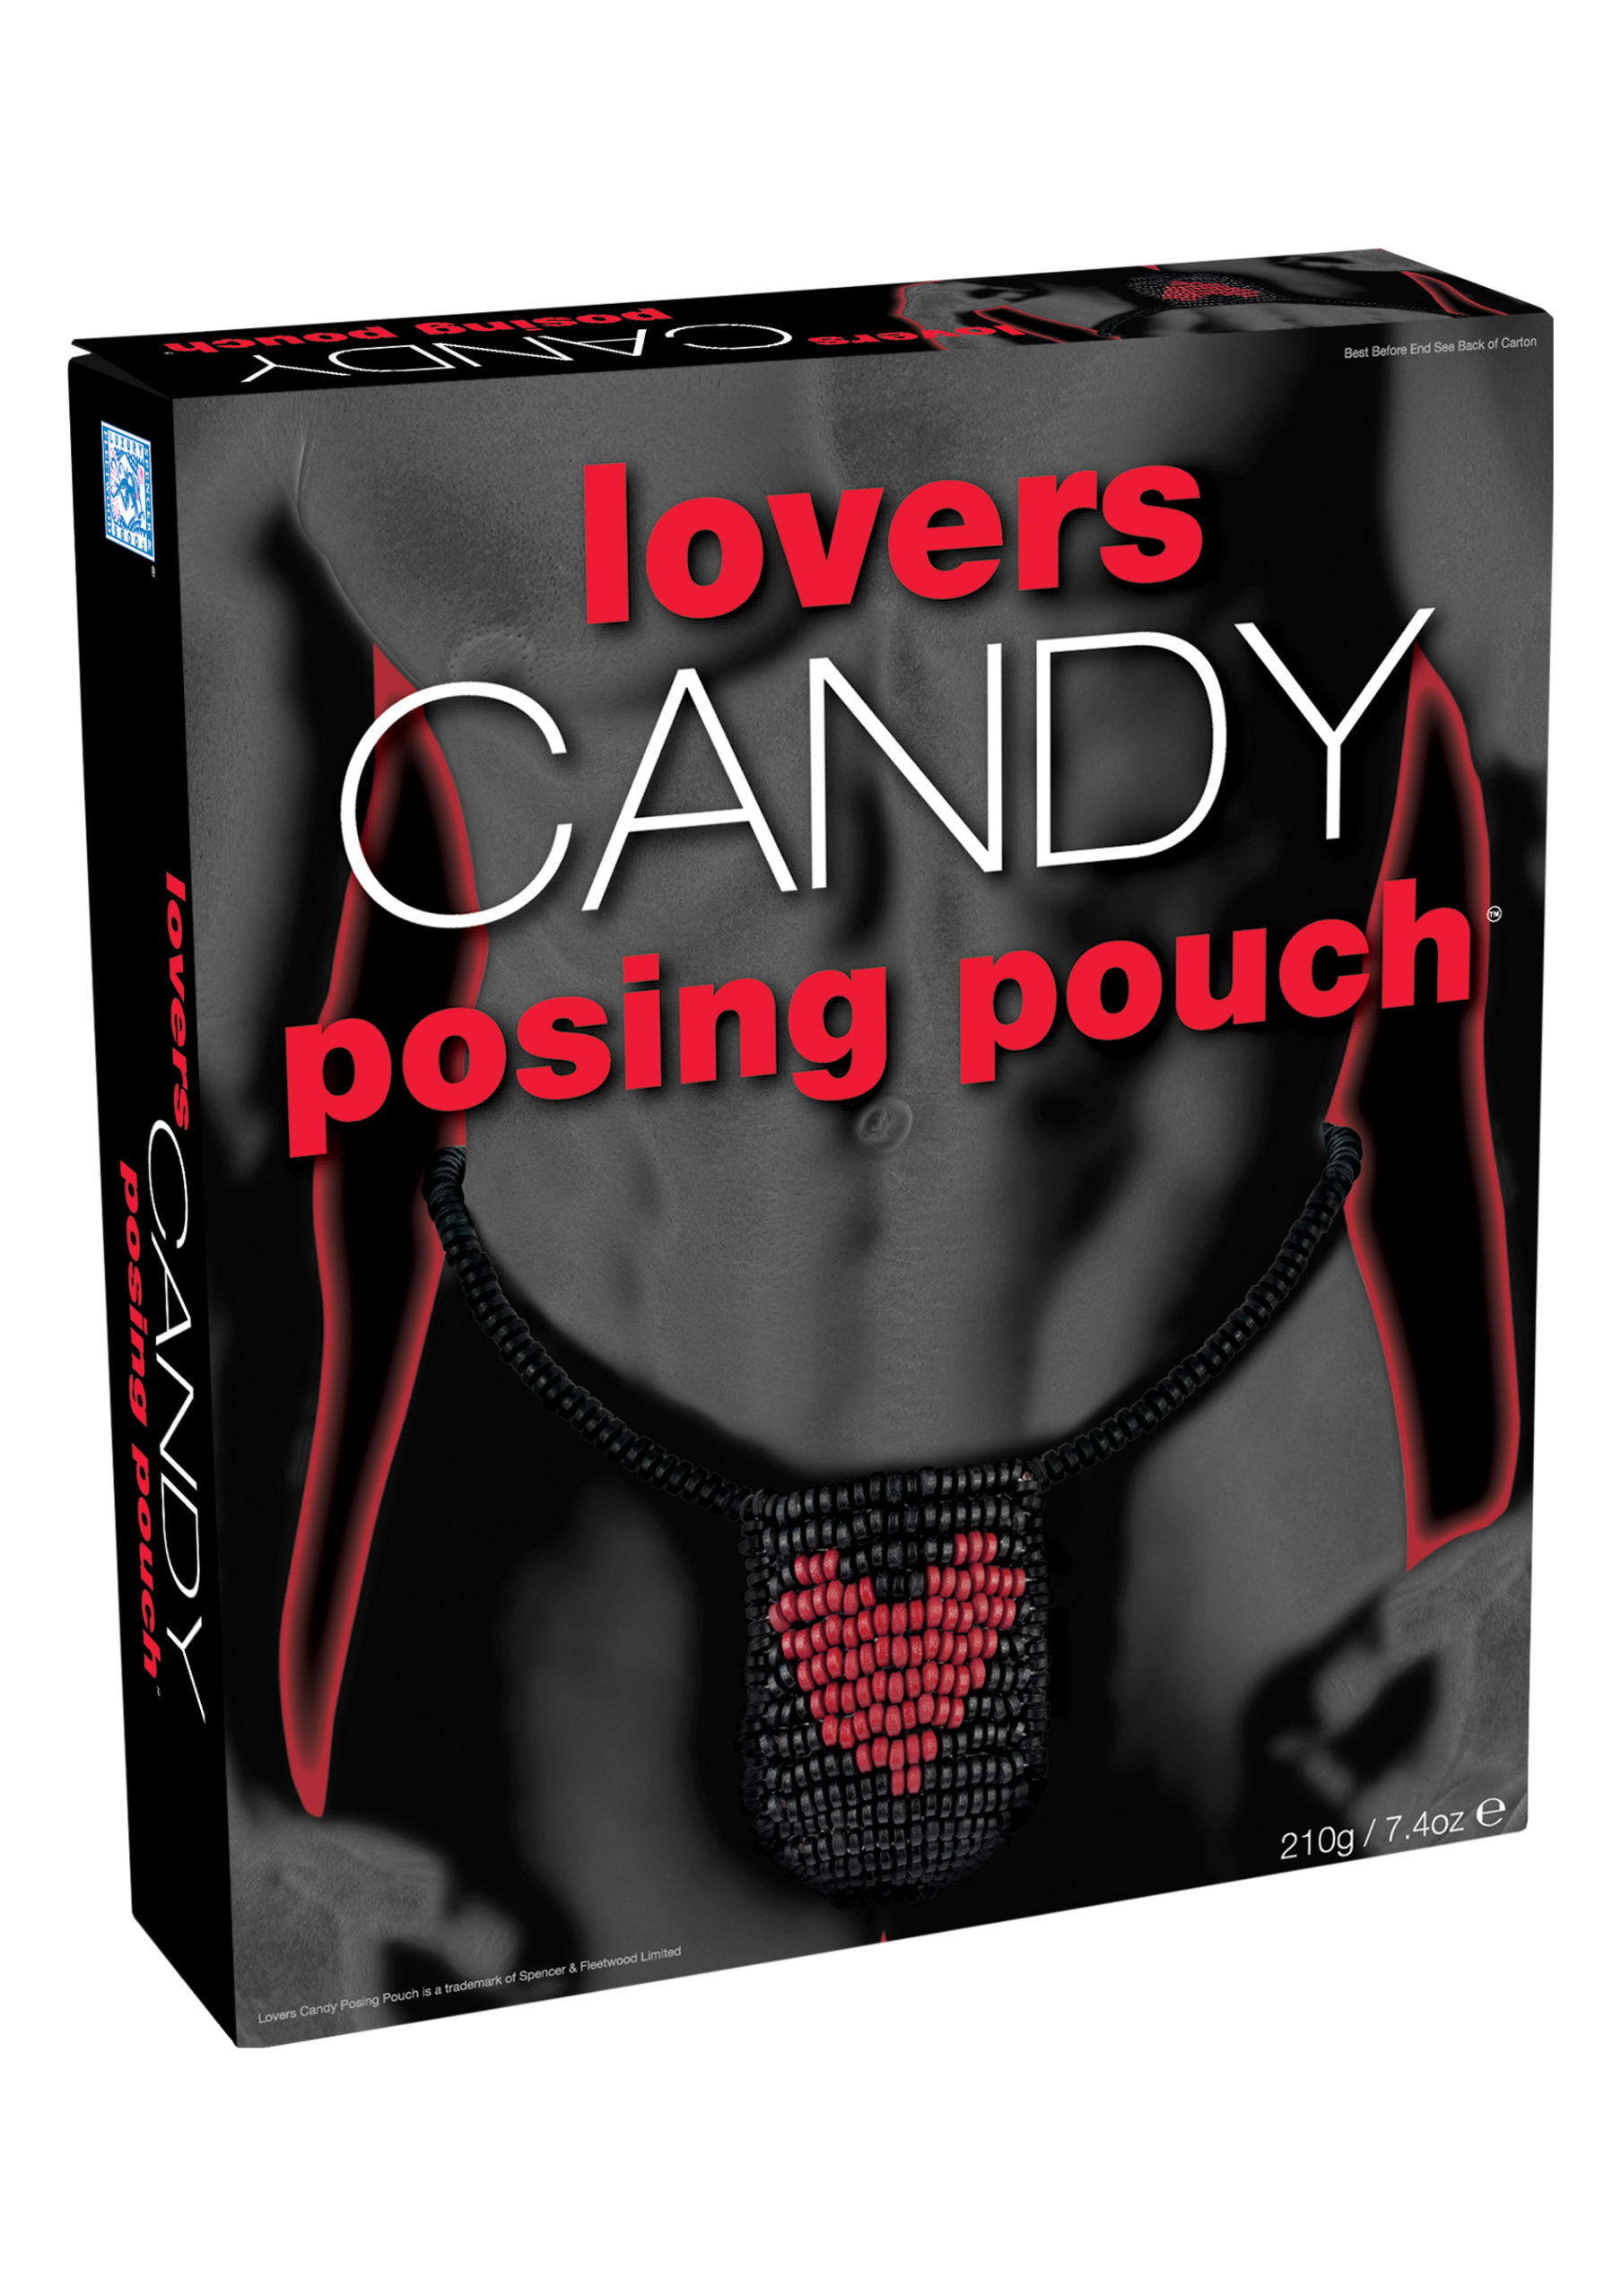 DOLCE SLIP UOMO LOVER’S CANDY POSING POUCH